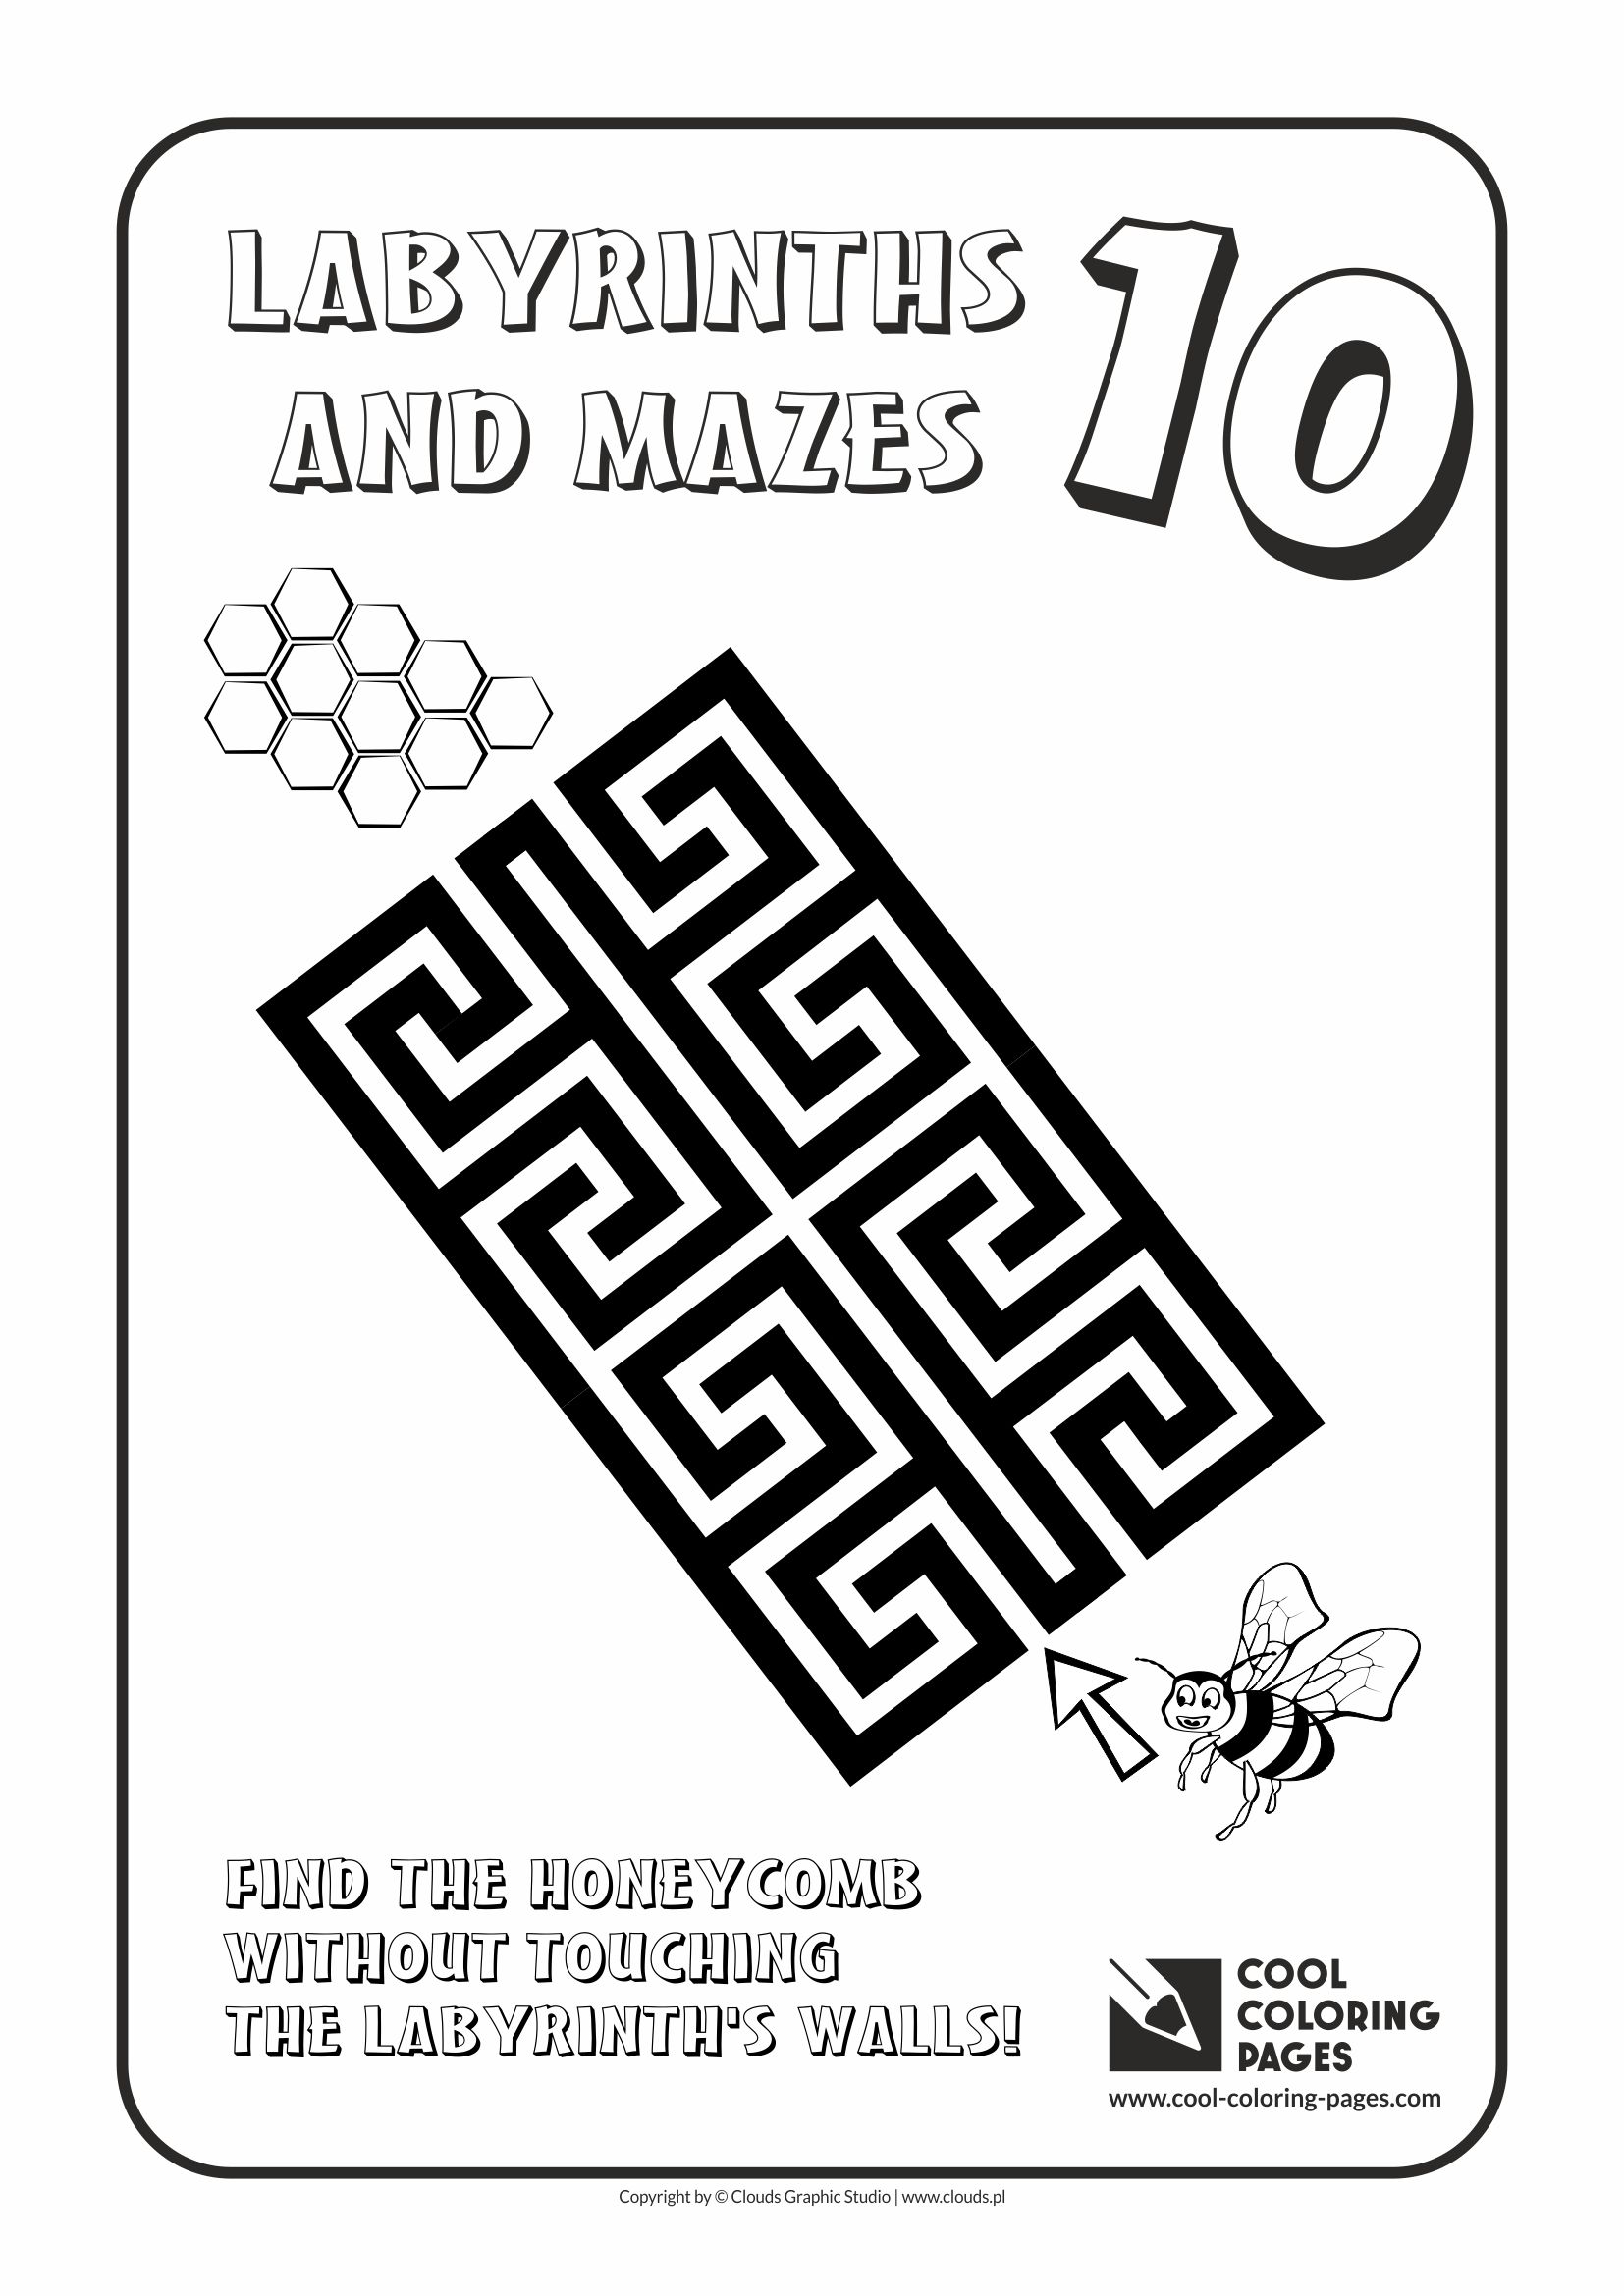 Download Cool Coloring Pages Labyrinths and Mazes - Cool Coloring Pages | Free educational coloring pages ...